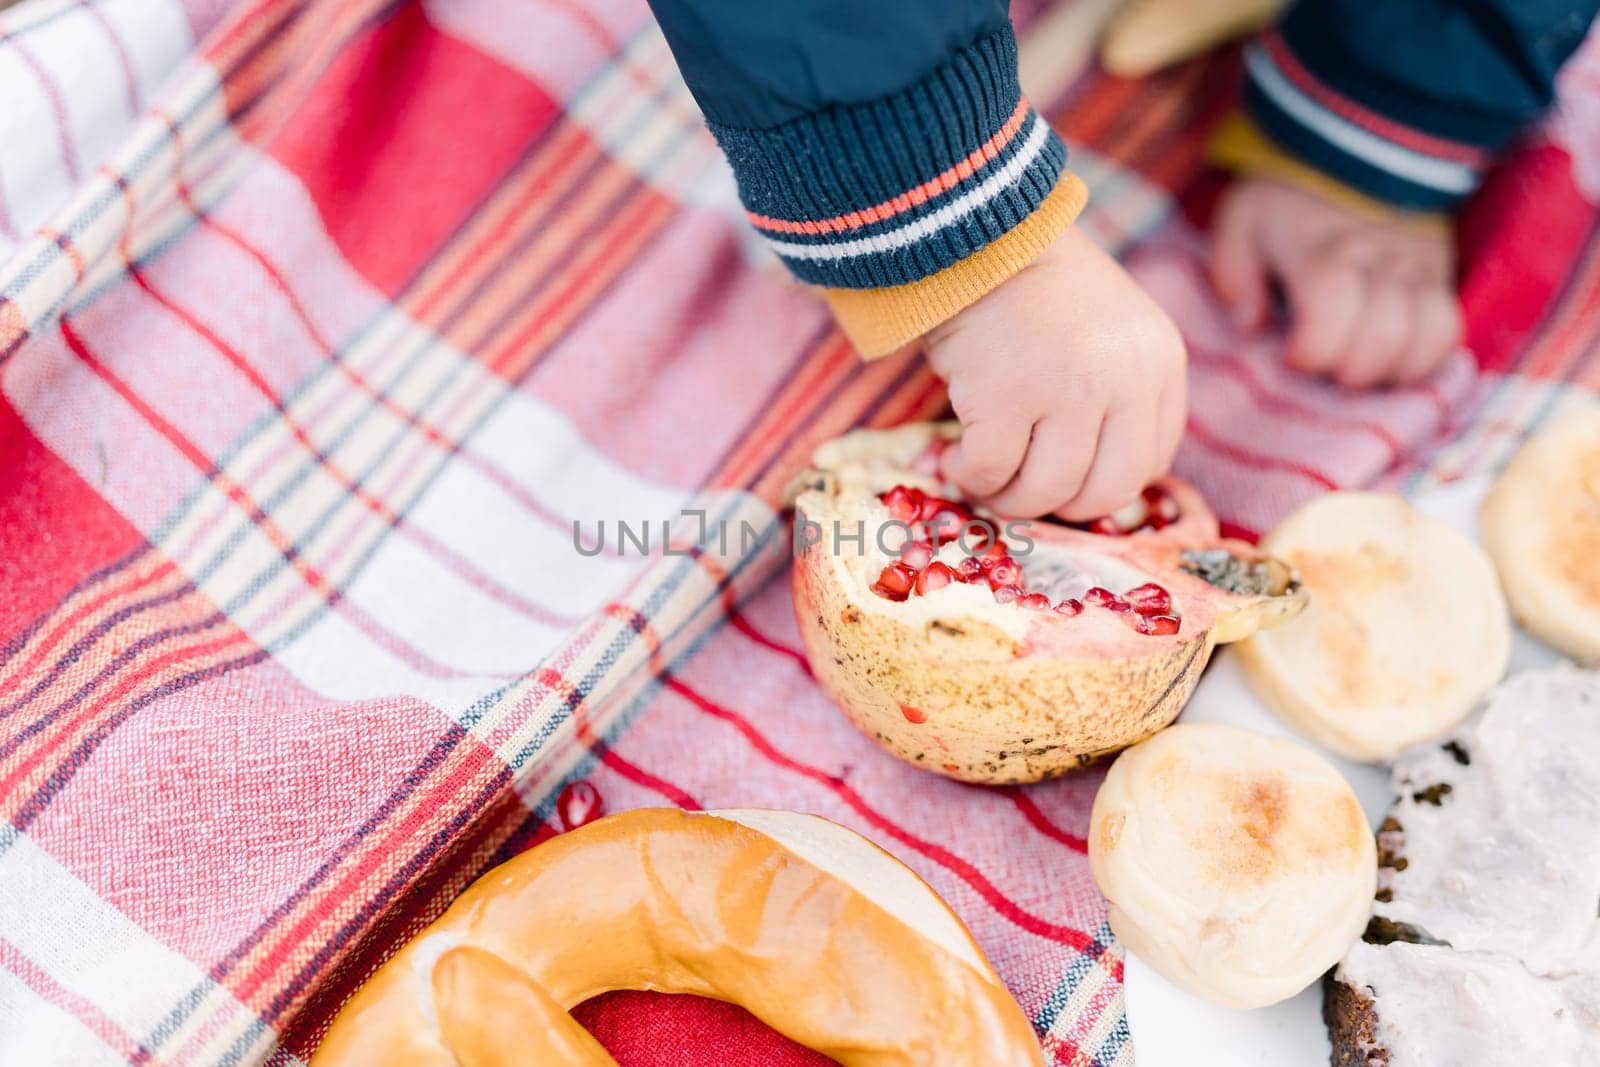 Small child picks out seeds from a pomegranate while sitting on a bedspread. Cropped. Faceless by Nadtochiy